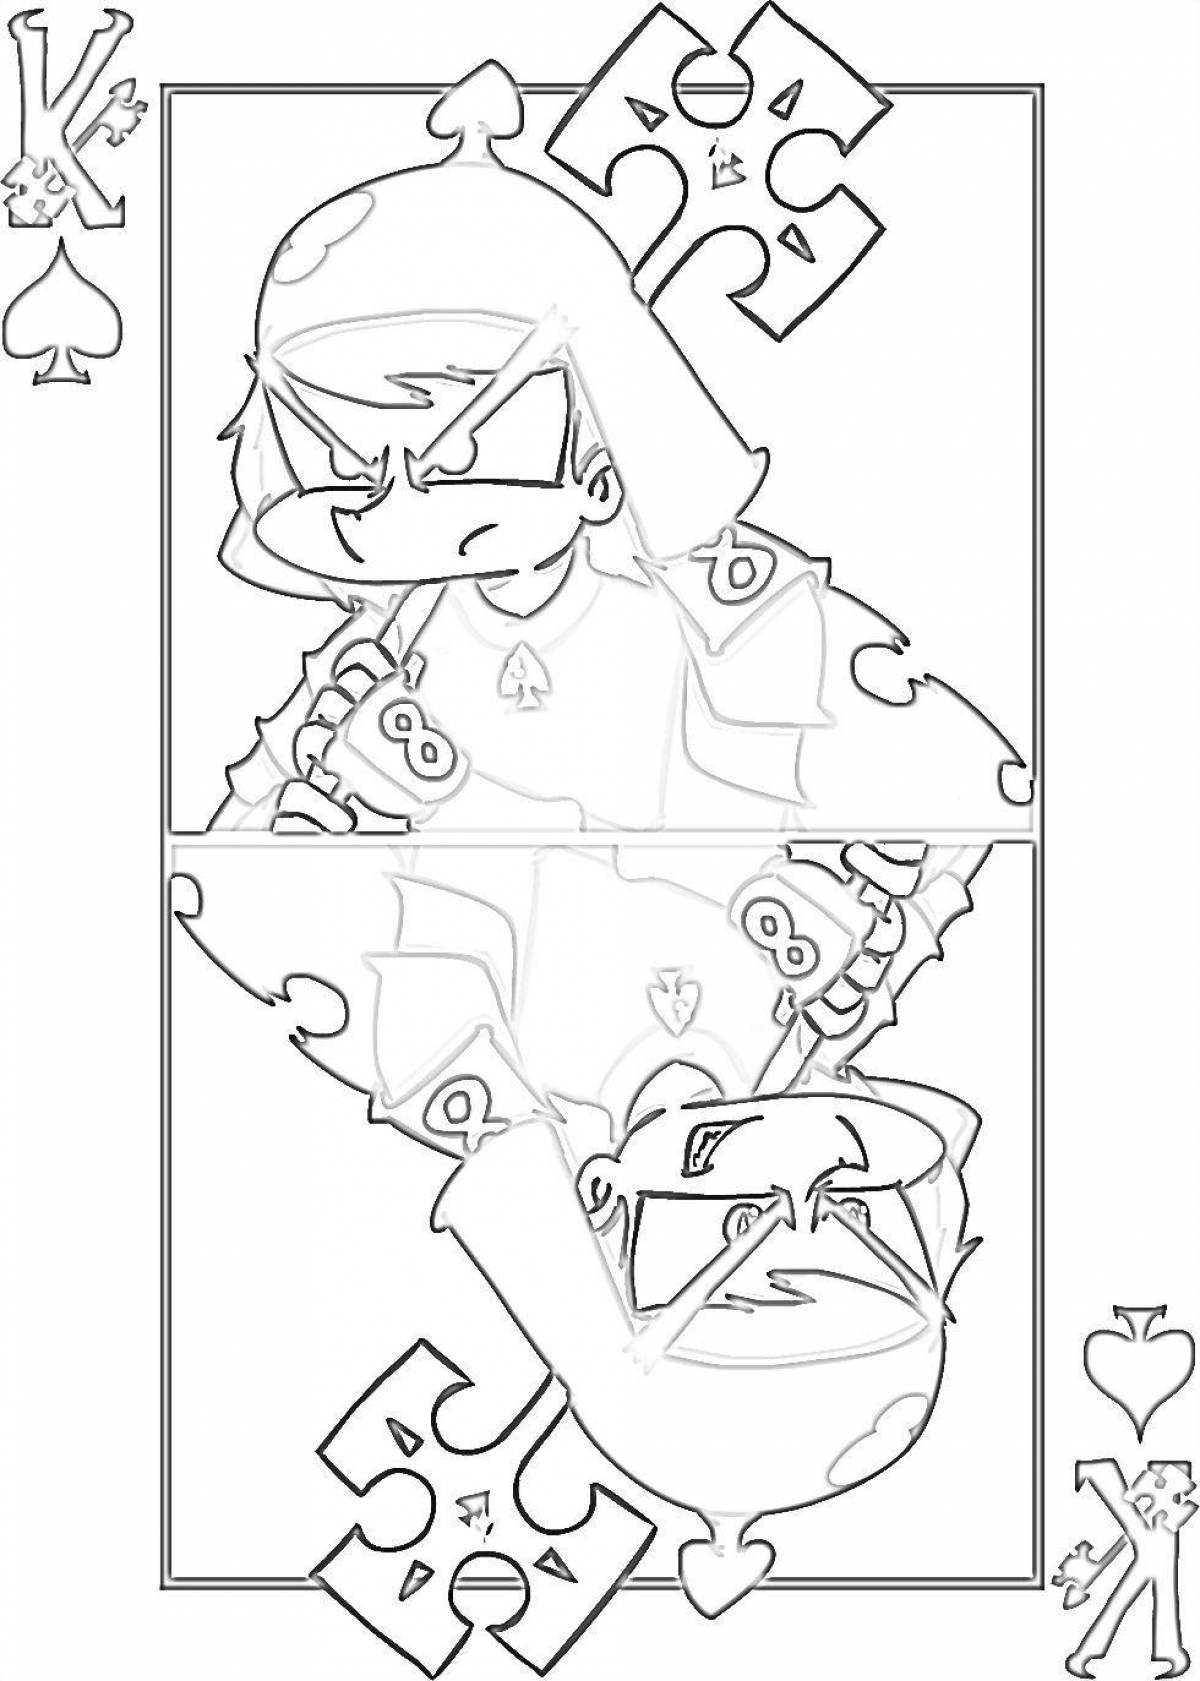 Grand coloring page king of spades 13 cards